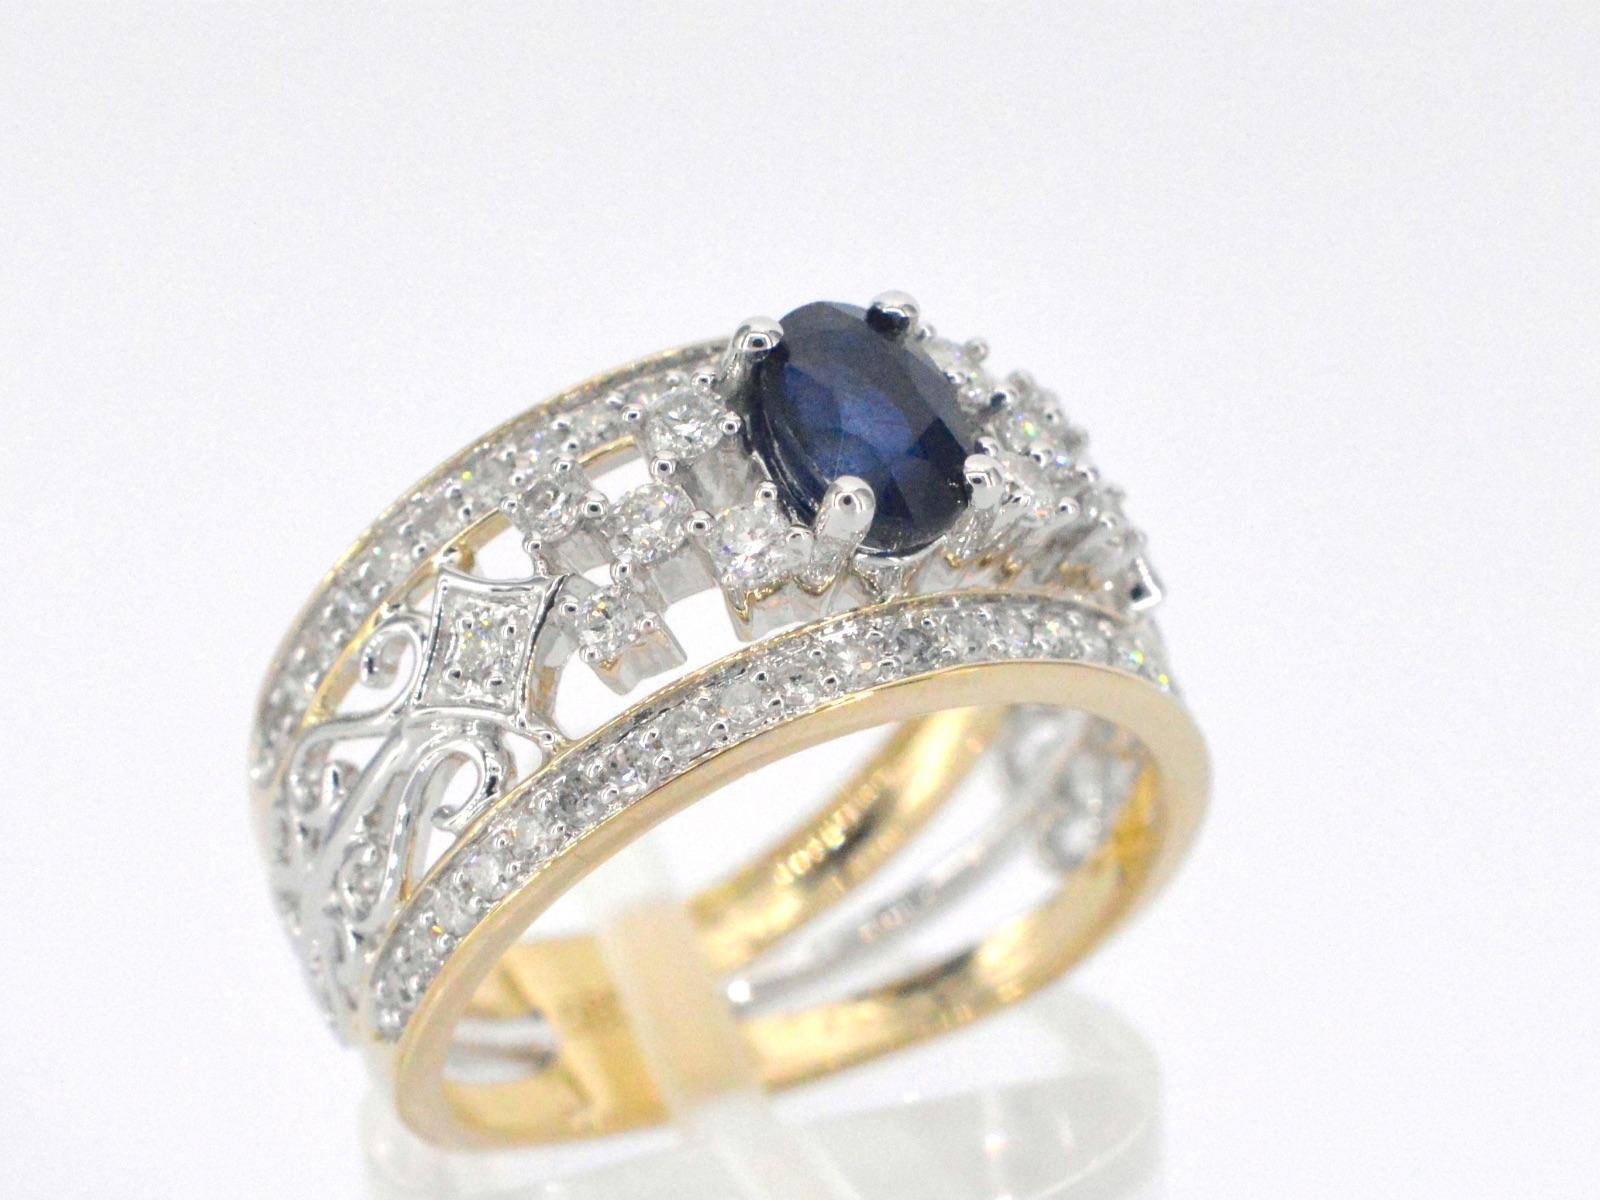 Women's Gold Exclusive Ring Full of Diamonds and a Sapphire For Sale